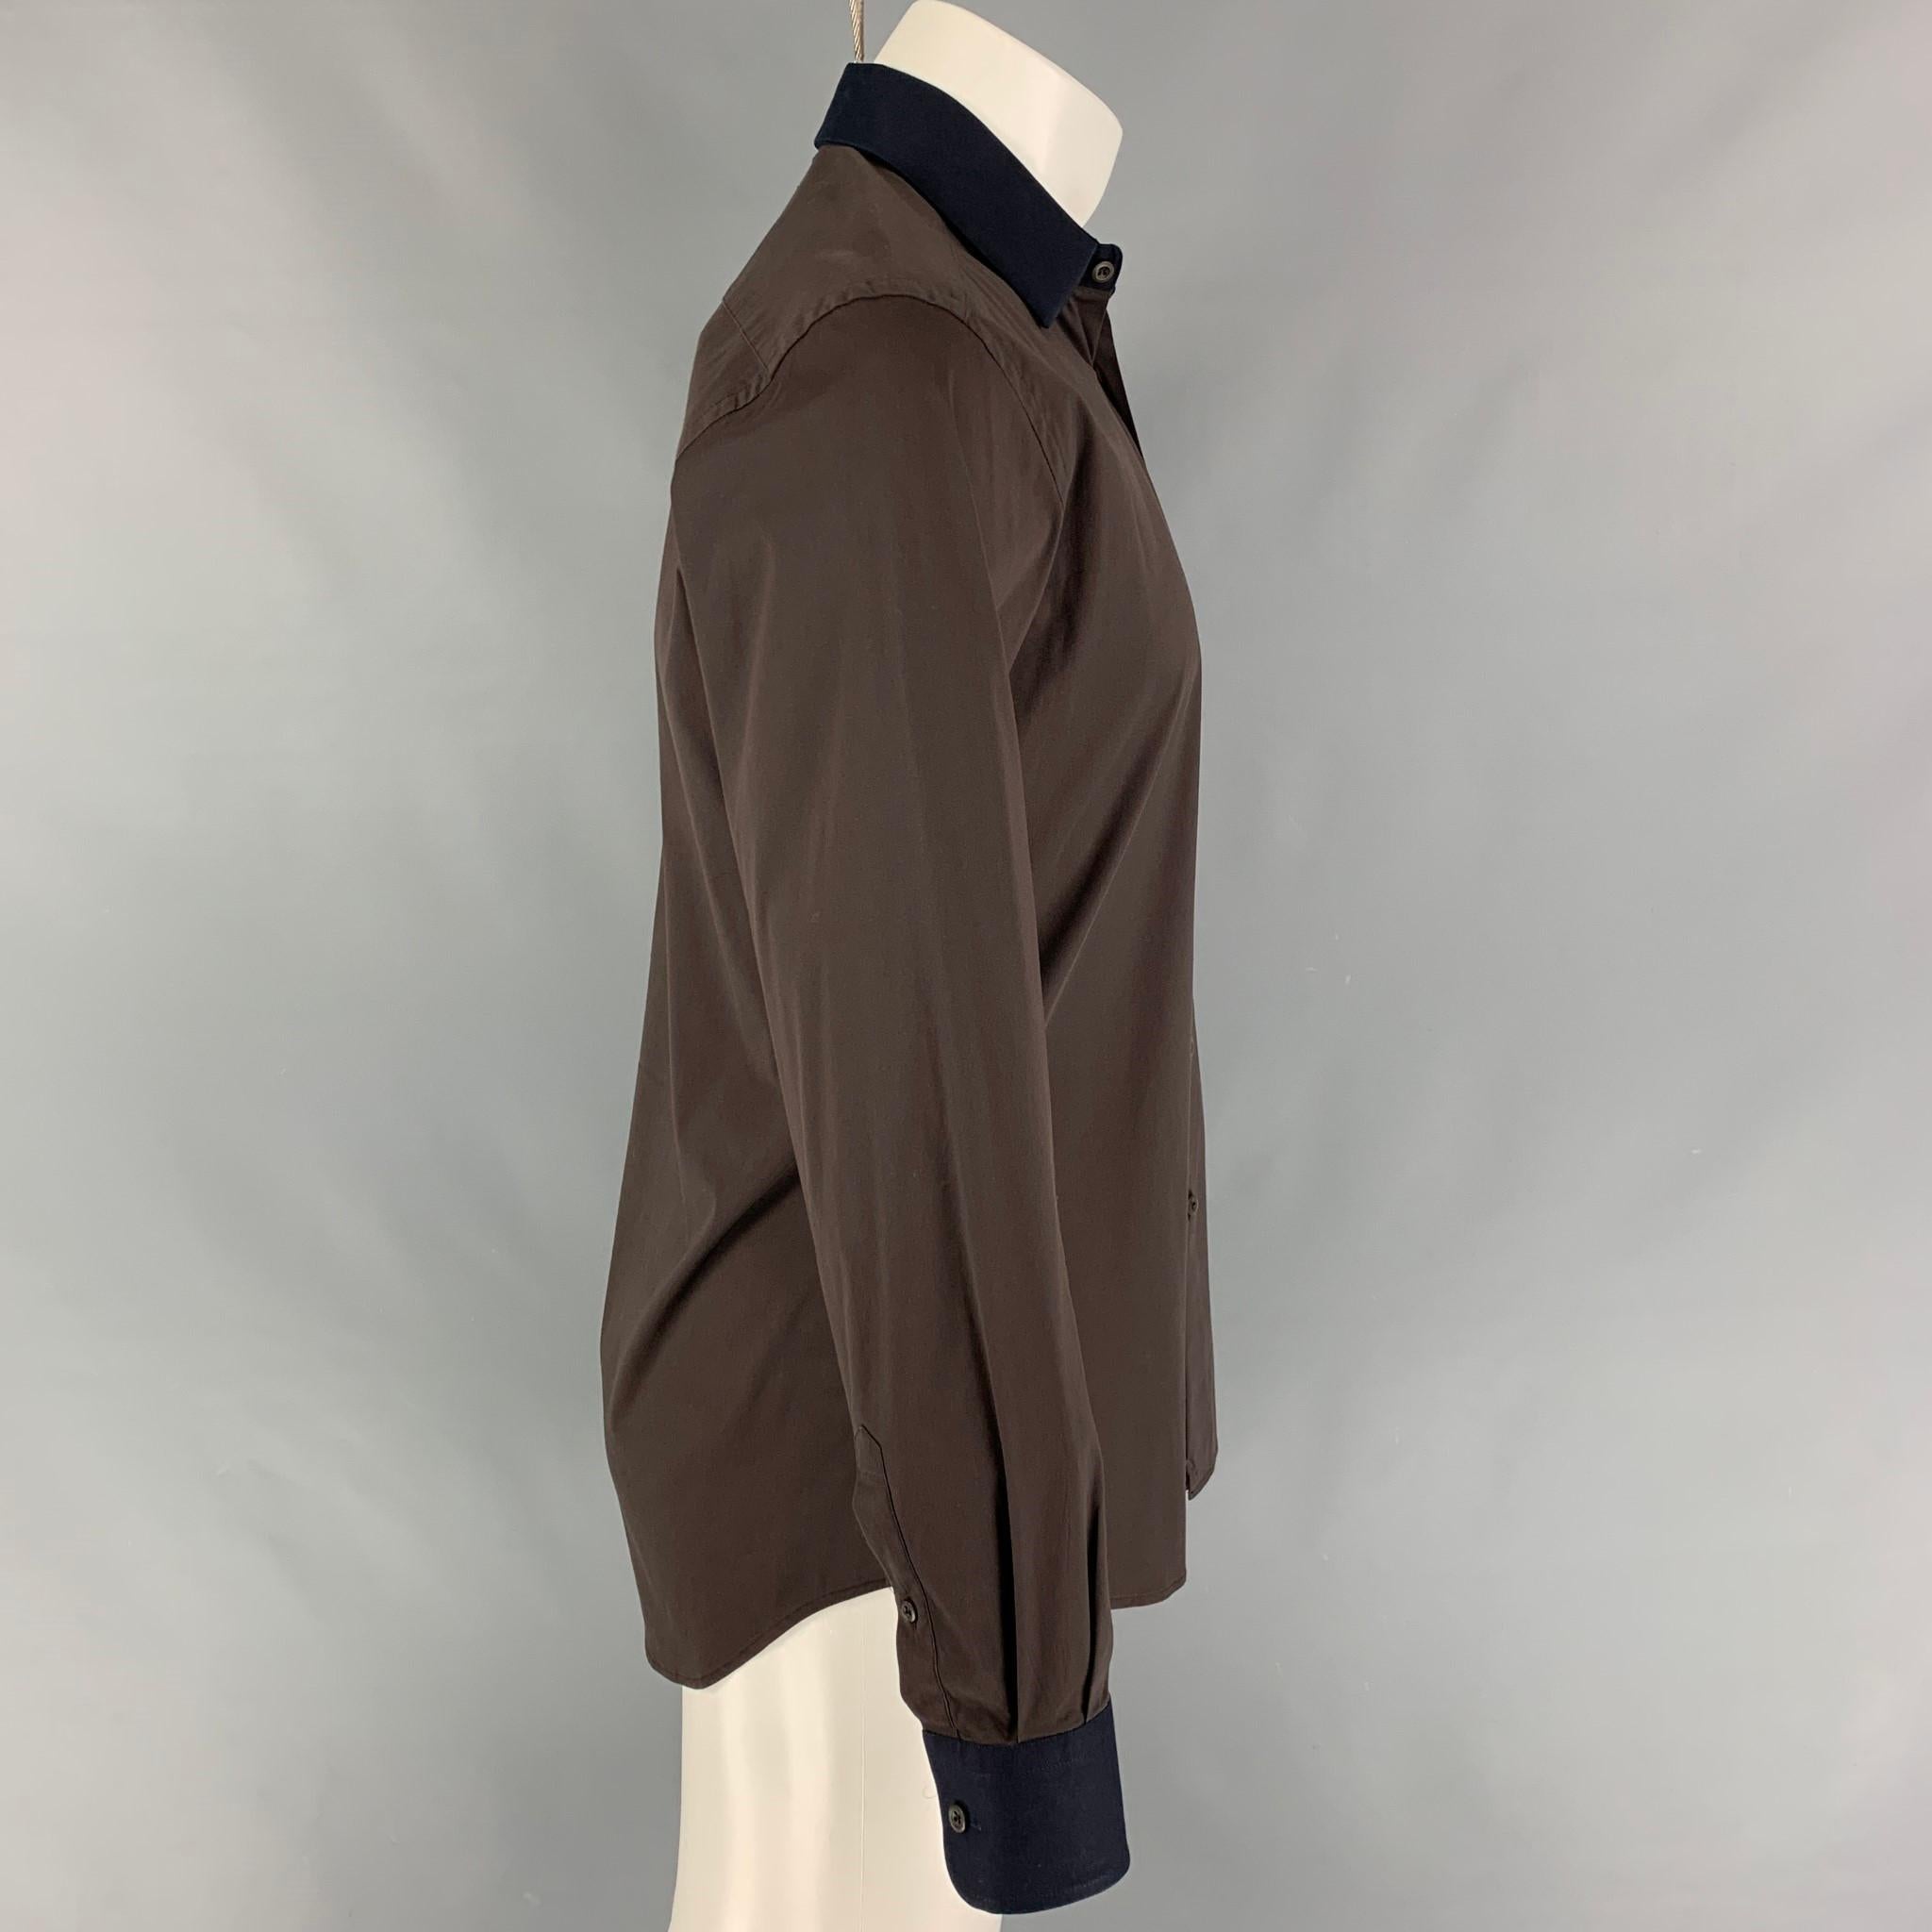 PRADA long sleeve shirt comes in a brown cotton blend with a navy spread collar featuring a button up closure. Made in Italy. 

Very Good Pre-Owned Condition.
Marked: 38/15

Measurements:

Shoulder: 18.5 in.
Chest: 42 in.
Sleeve: 25 in.
Length: 30